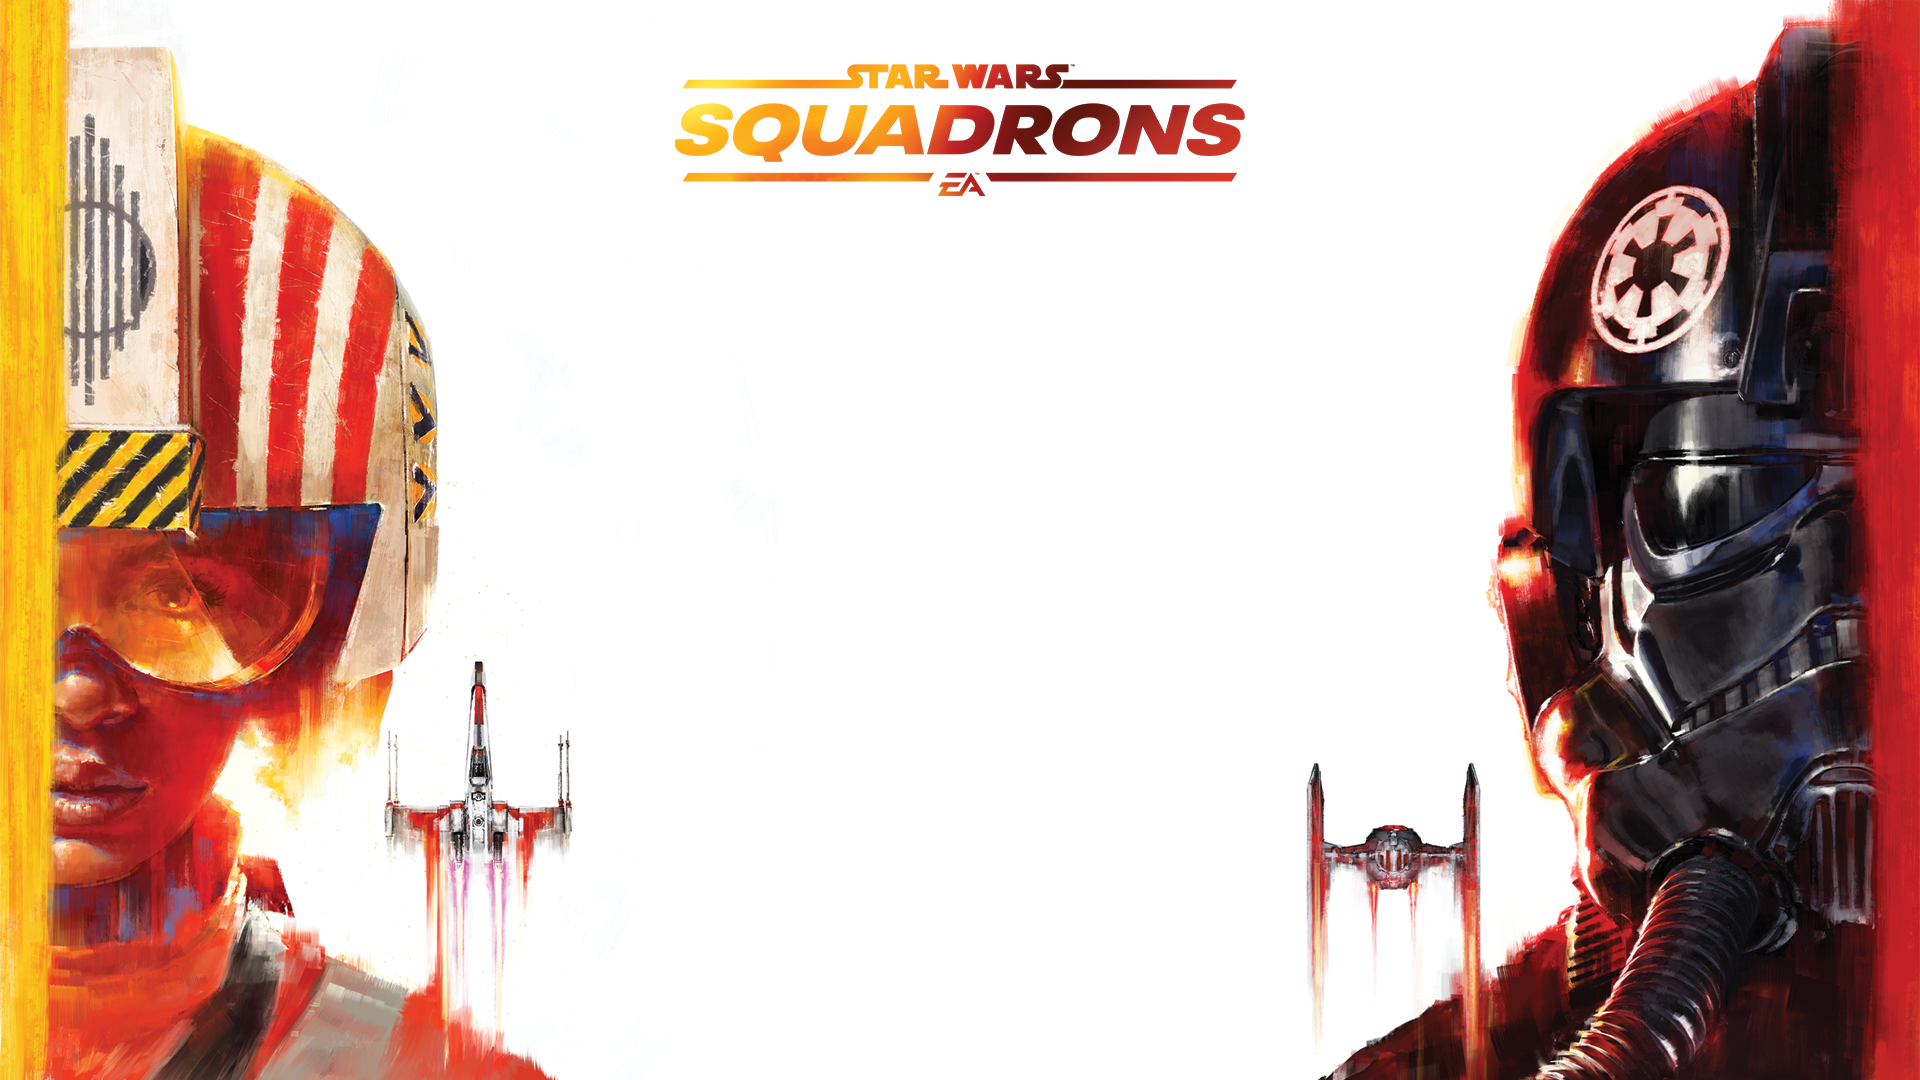 Star Wars Squadrons' progression system is cause for concern